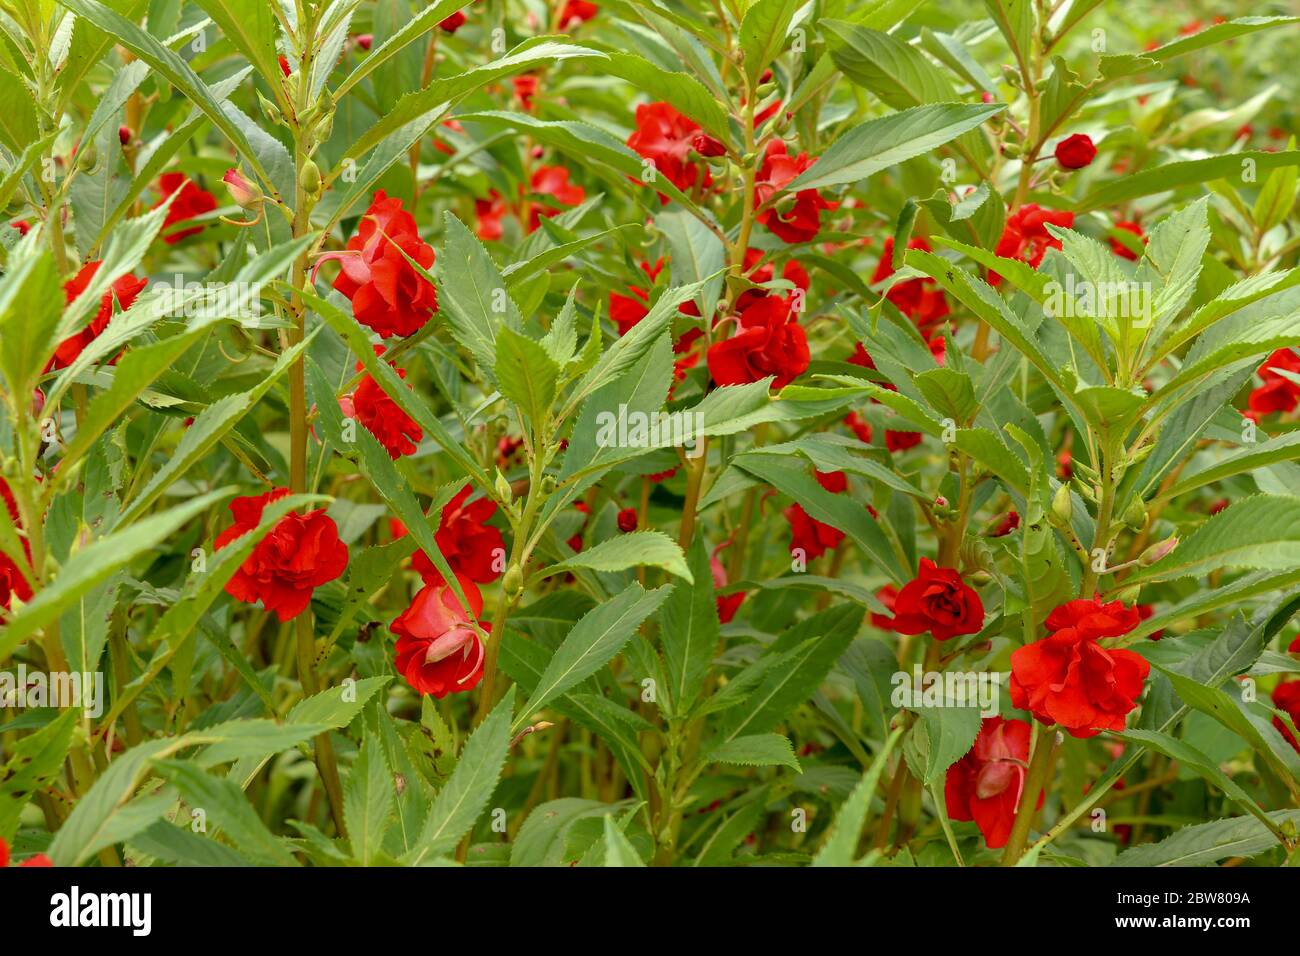 Impatiens balsamina with red flowers blossom and green leaves. S Stock Photo